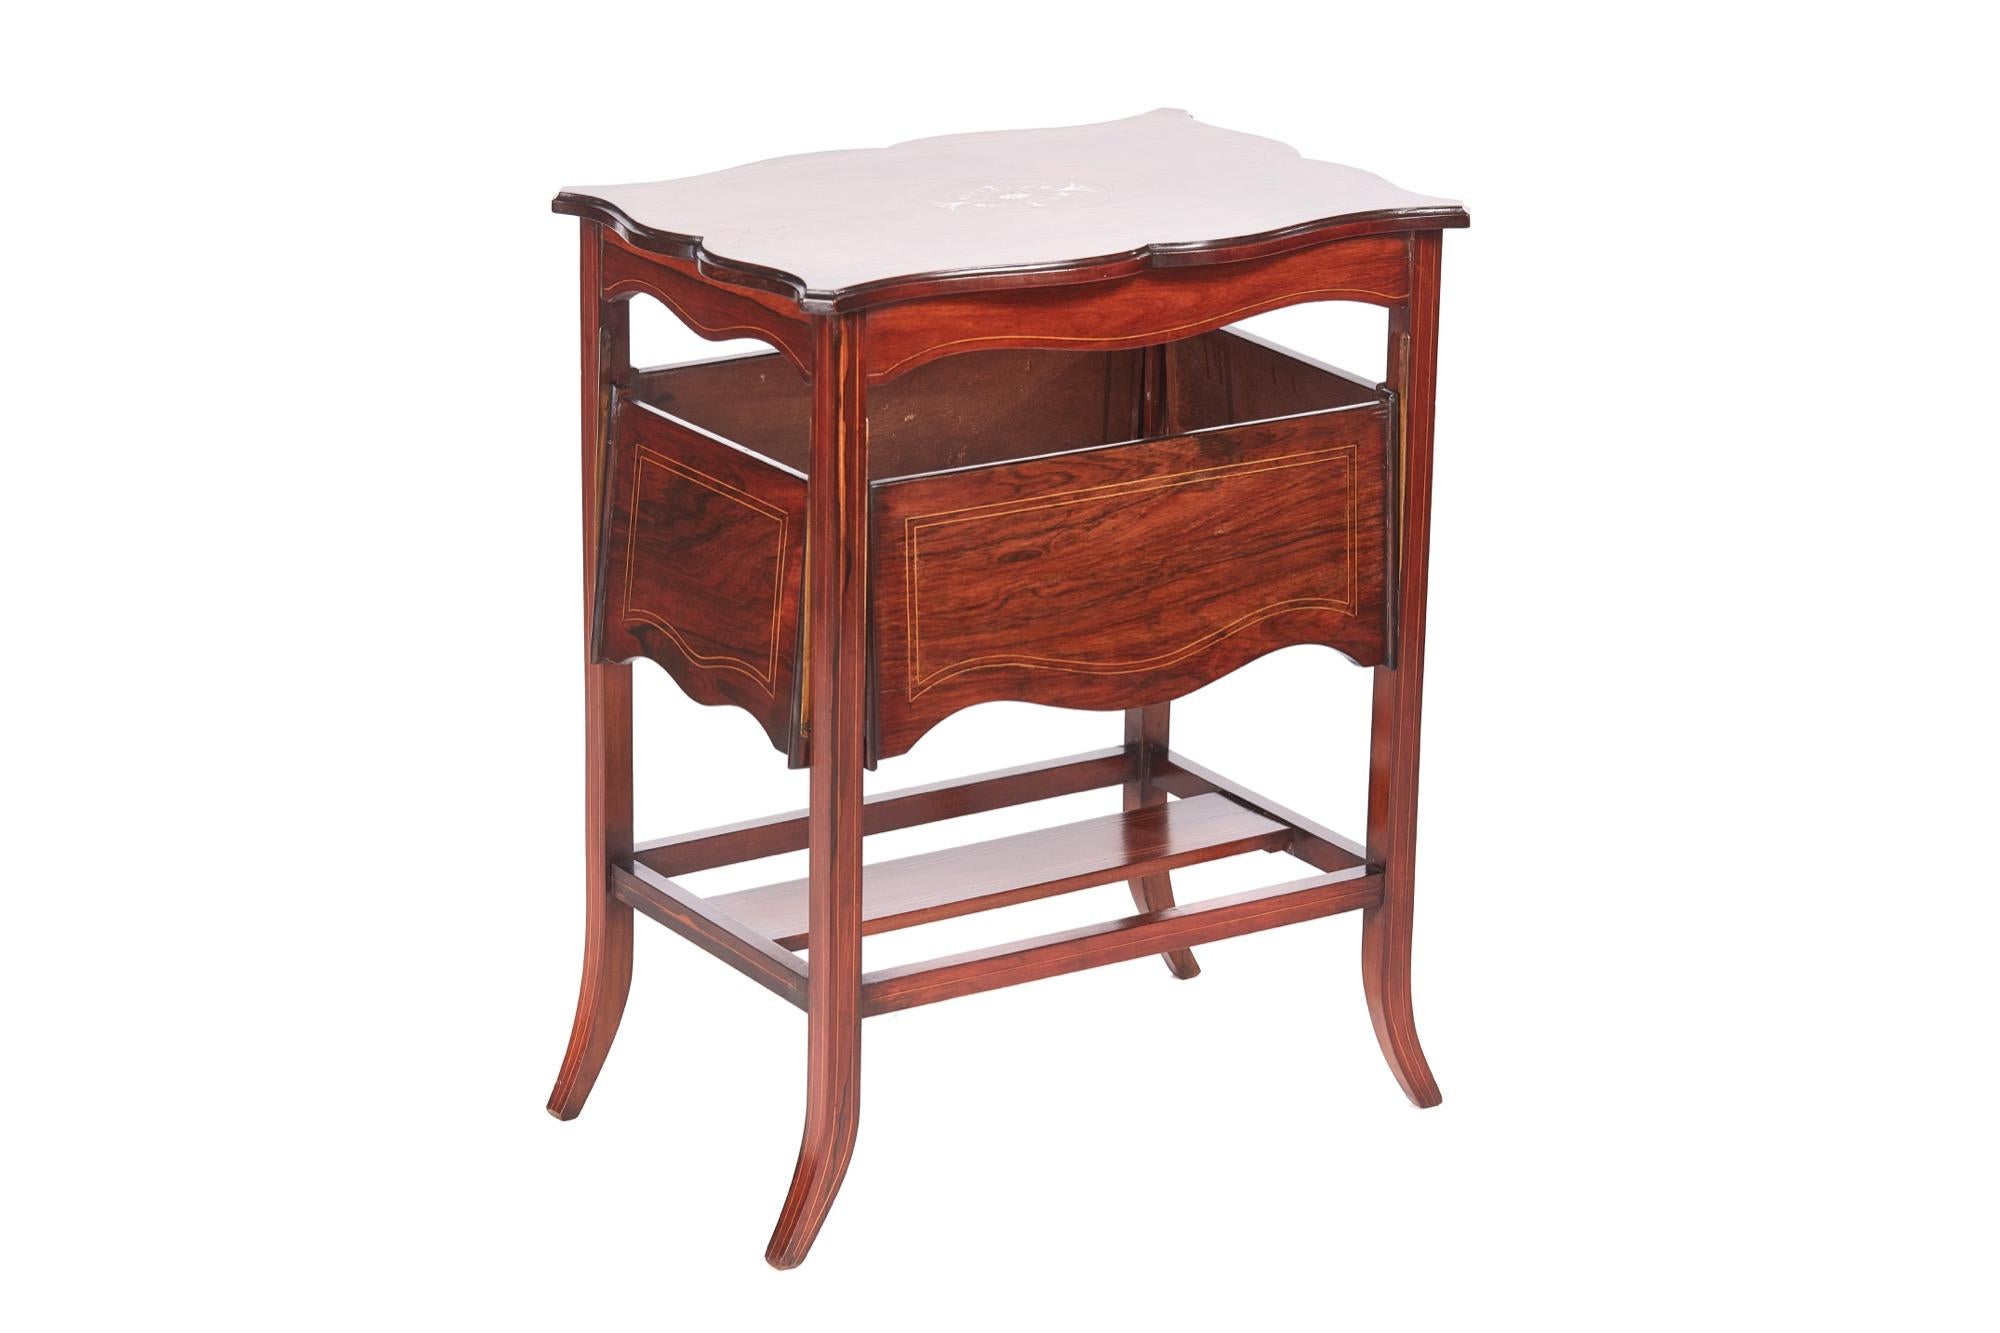 Unusual antique Edwardian inlaid hardwood centre table having a pretty inlaid and shaped rosewood top, four unusual inlaid rosewood shaped drop leaves. It stands on four shaped inlaid rosewood legs and united by square stretchers.

A very